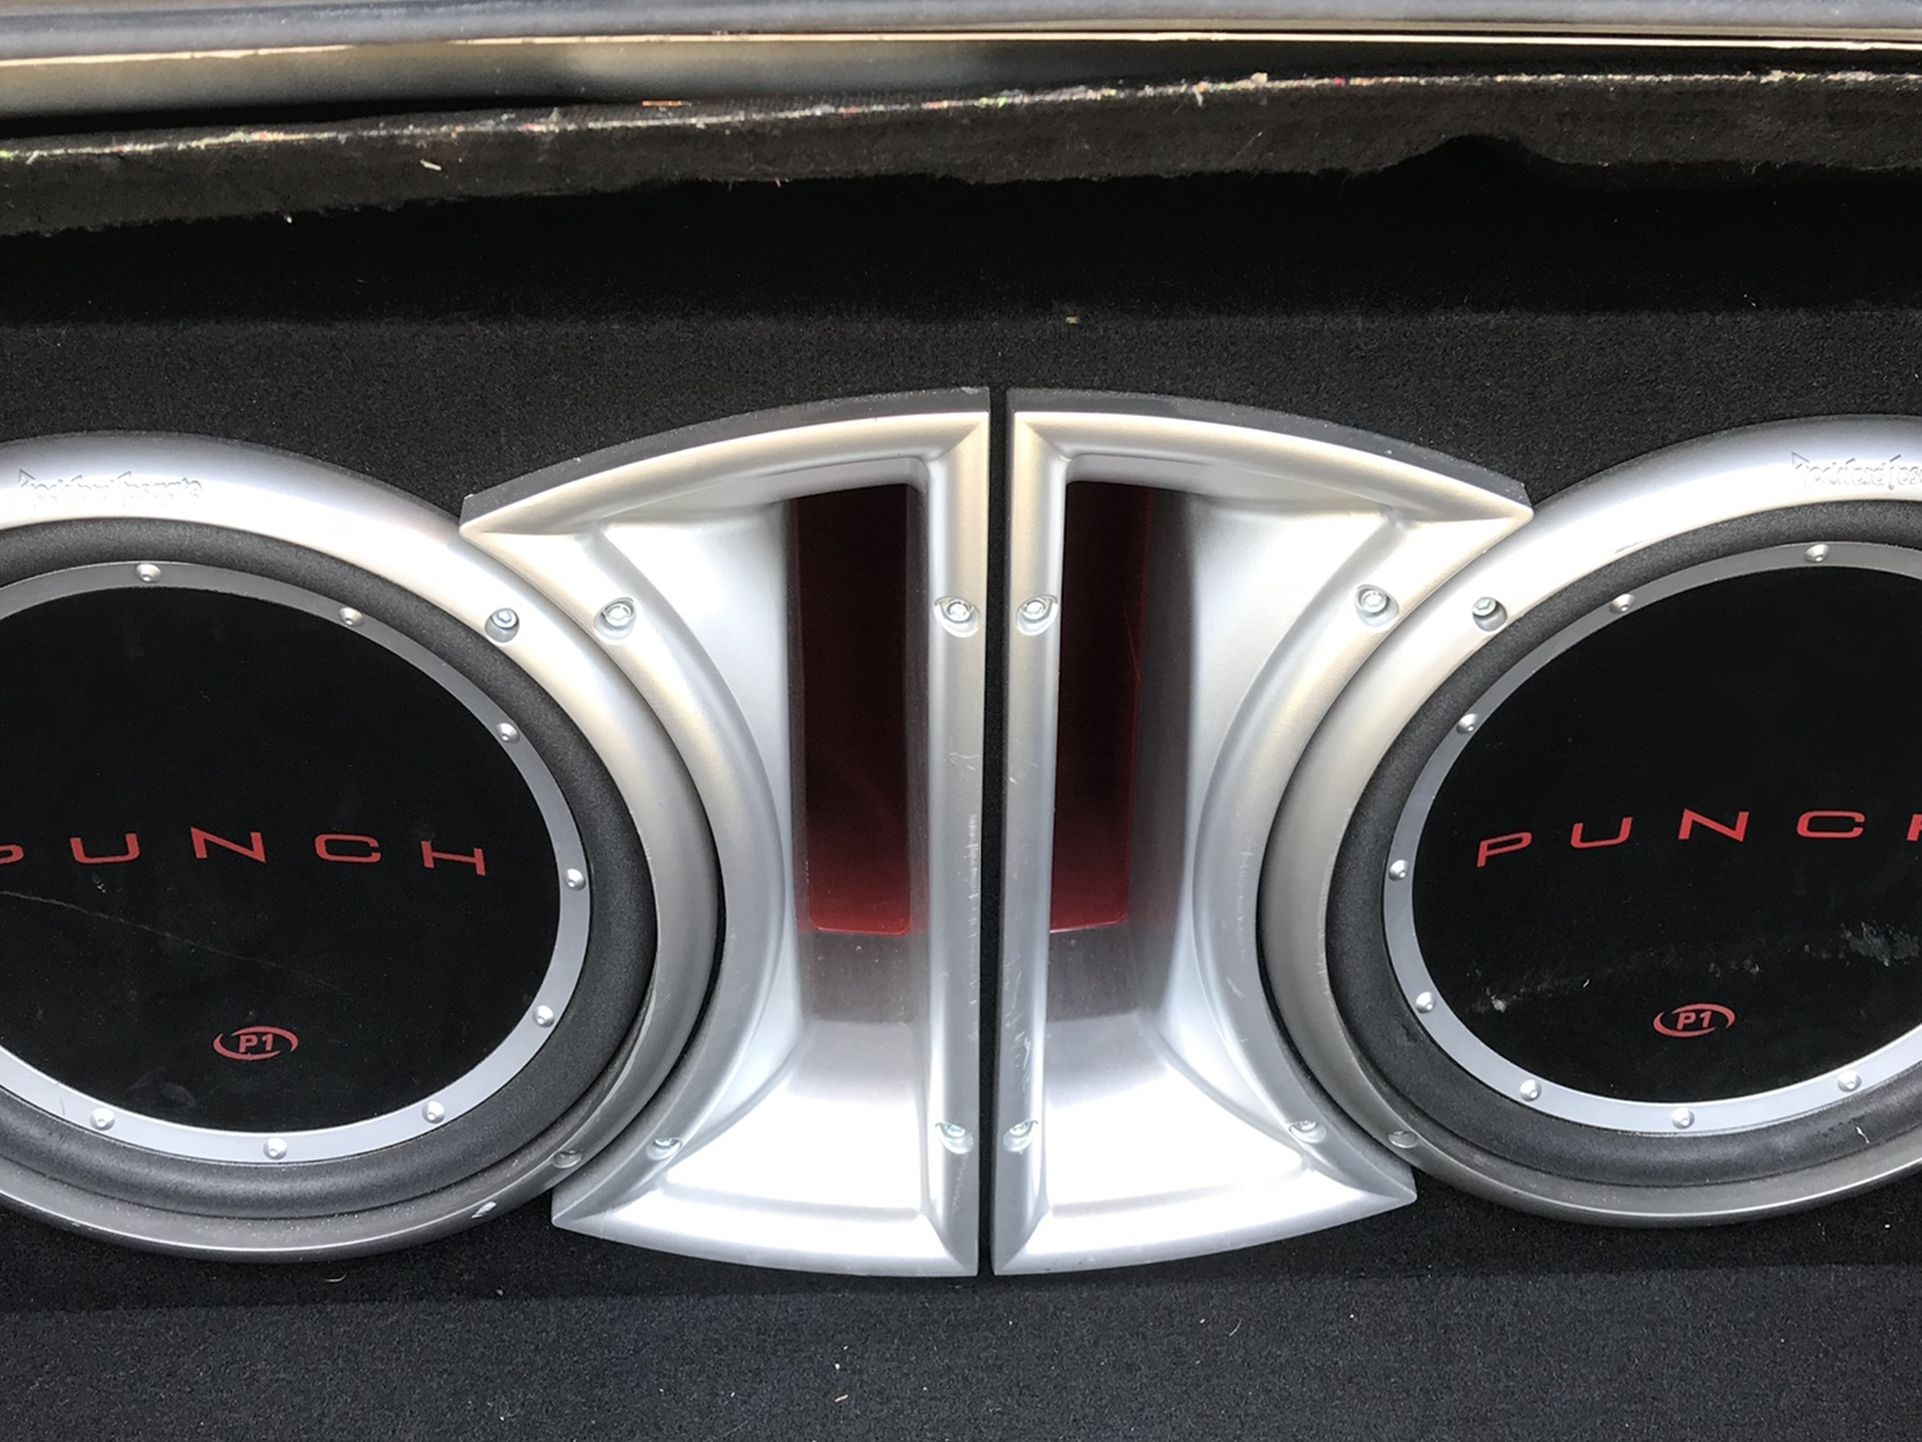 (2) 12” Rockford Punch Subs In Box And 1000 Watt Amp